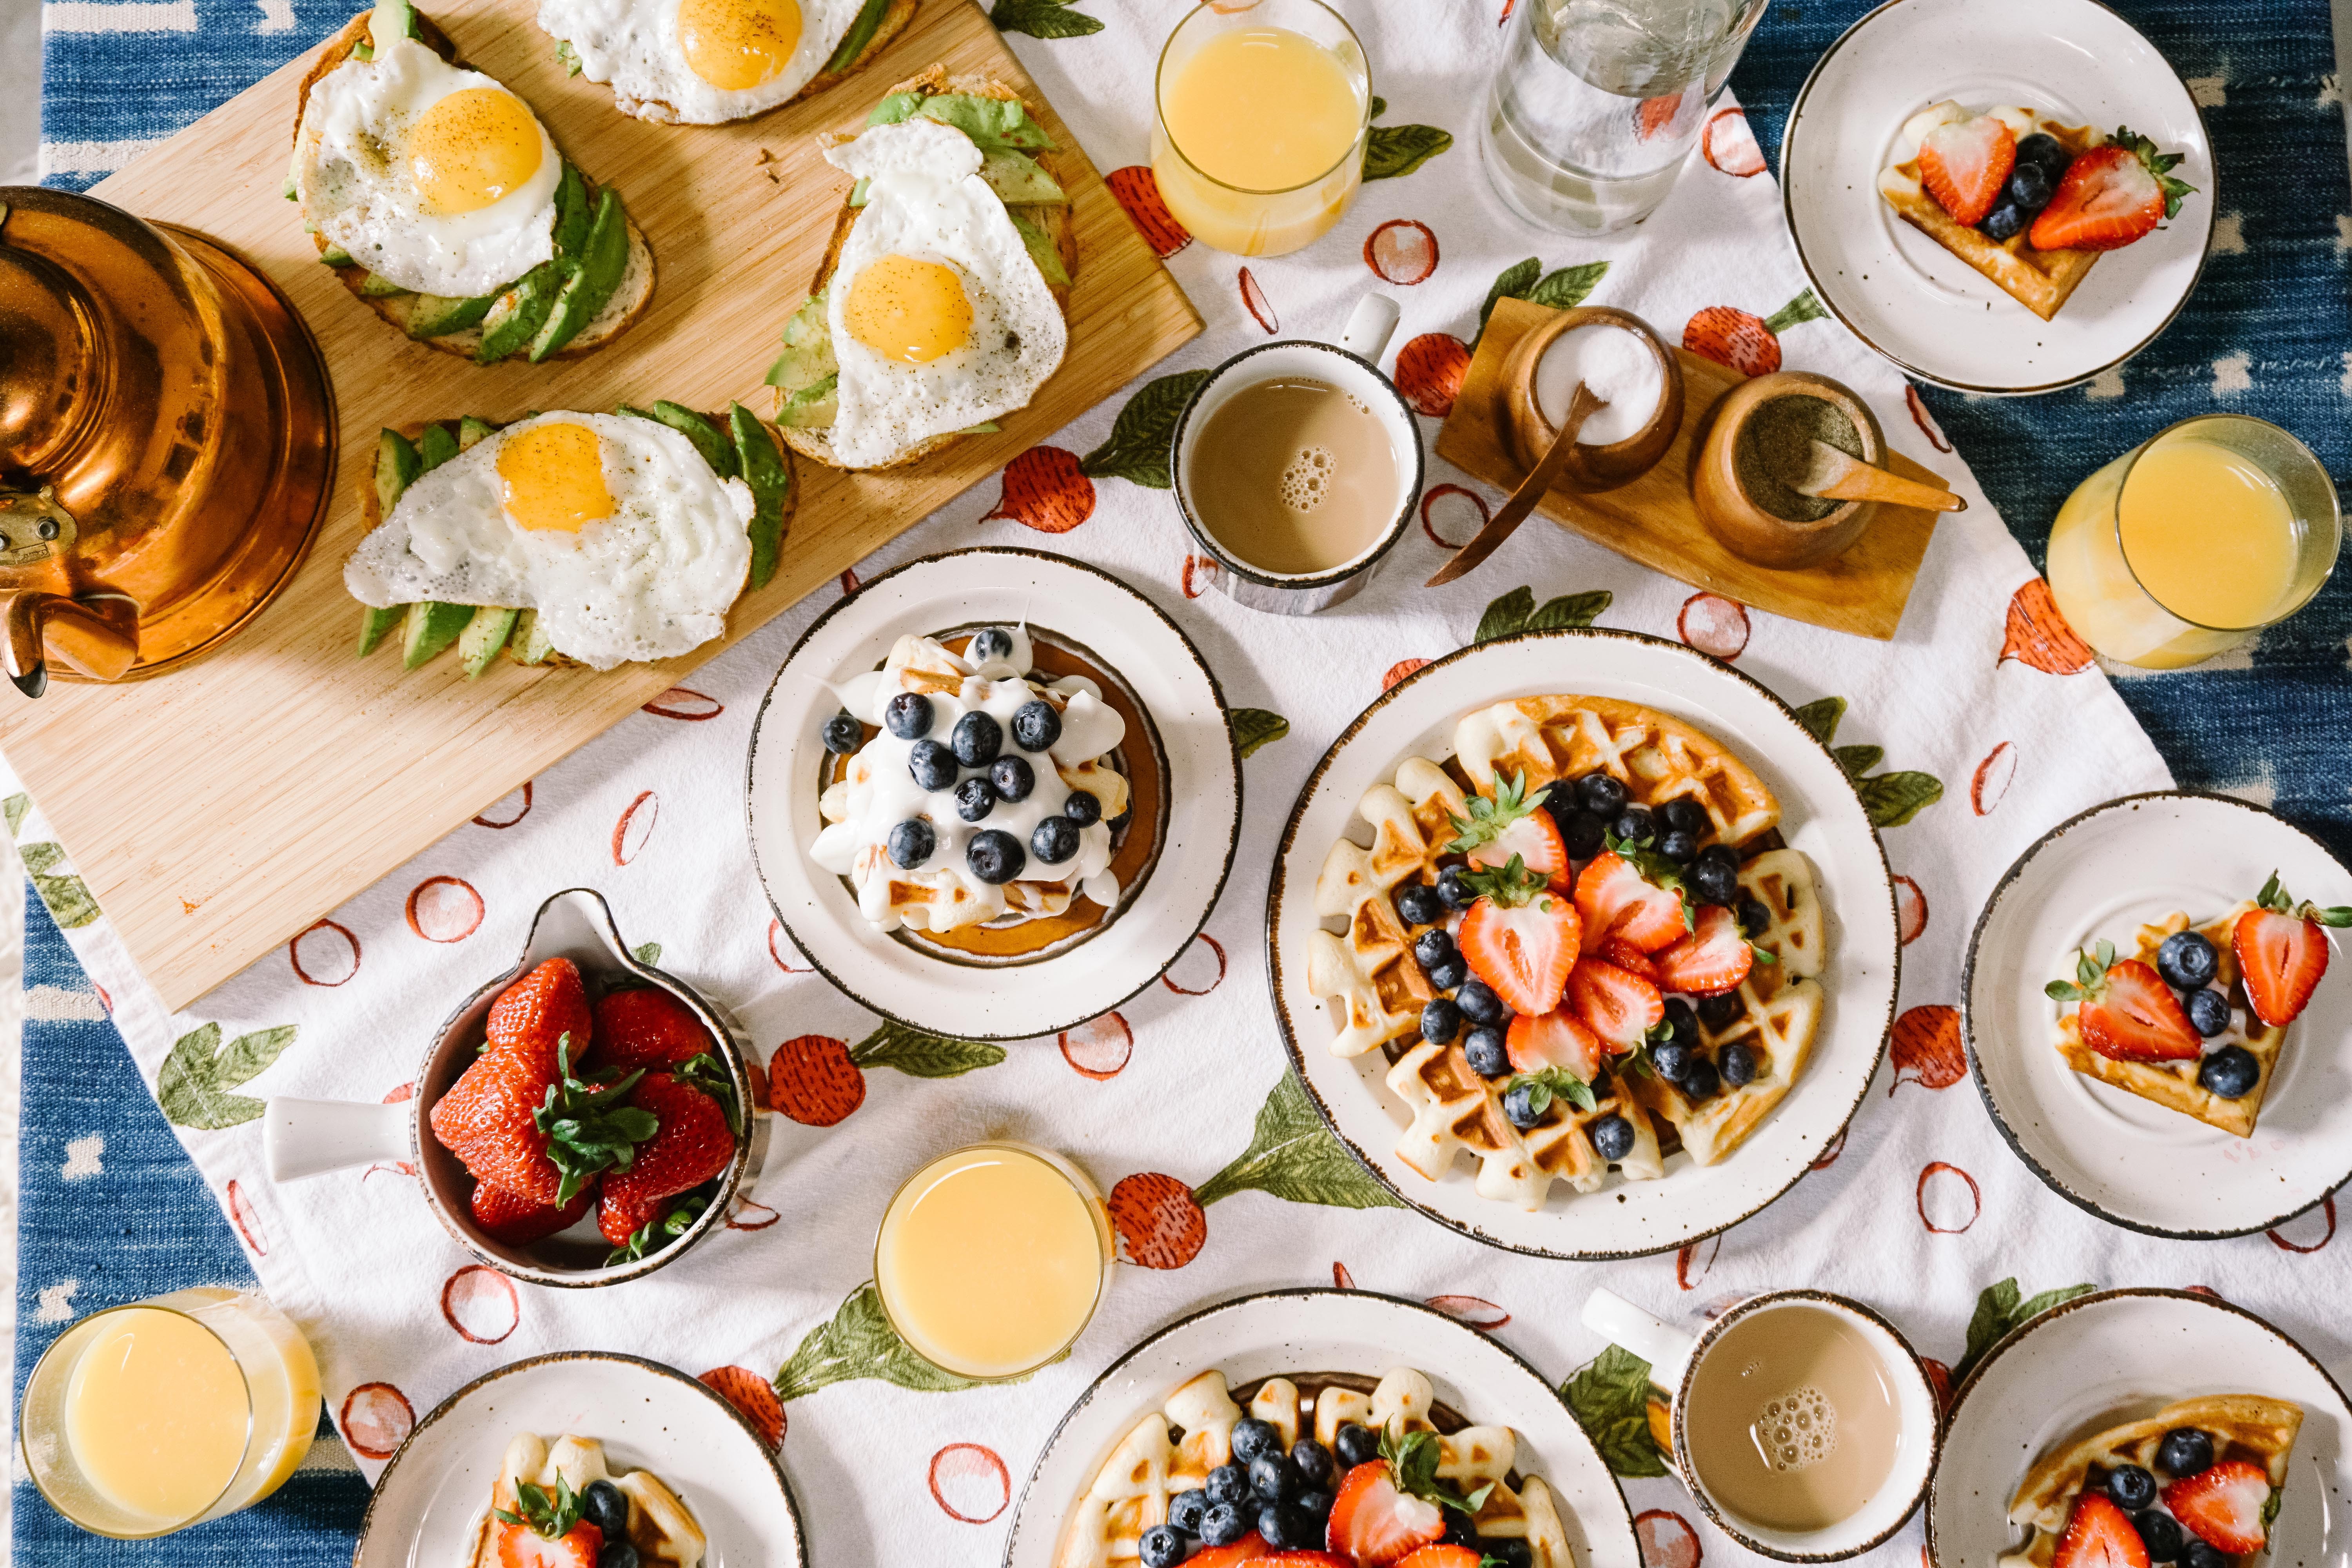 Six Tips For Planning the Perfect Mother's Day Brunch